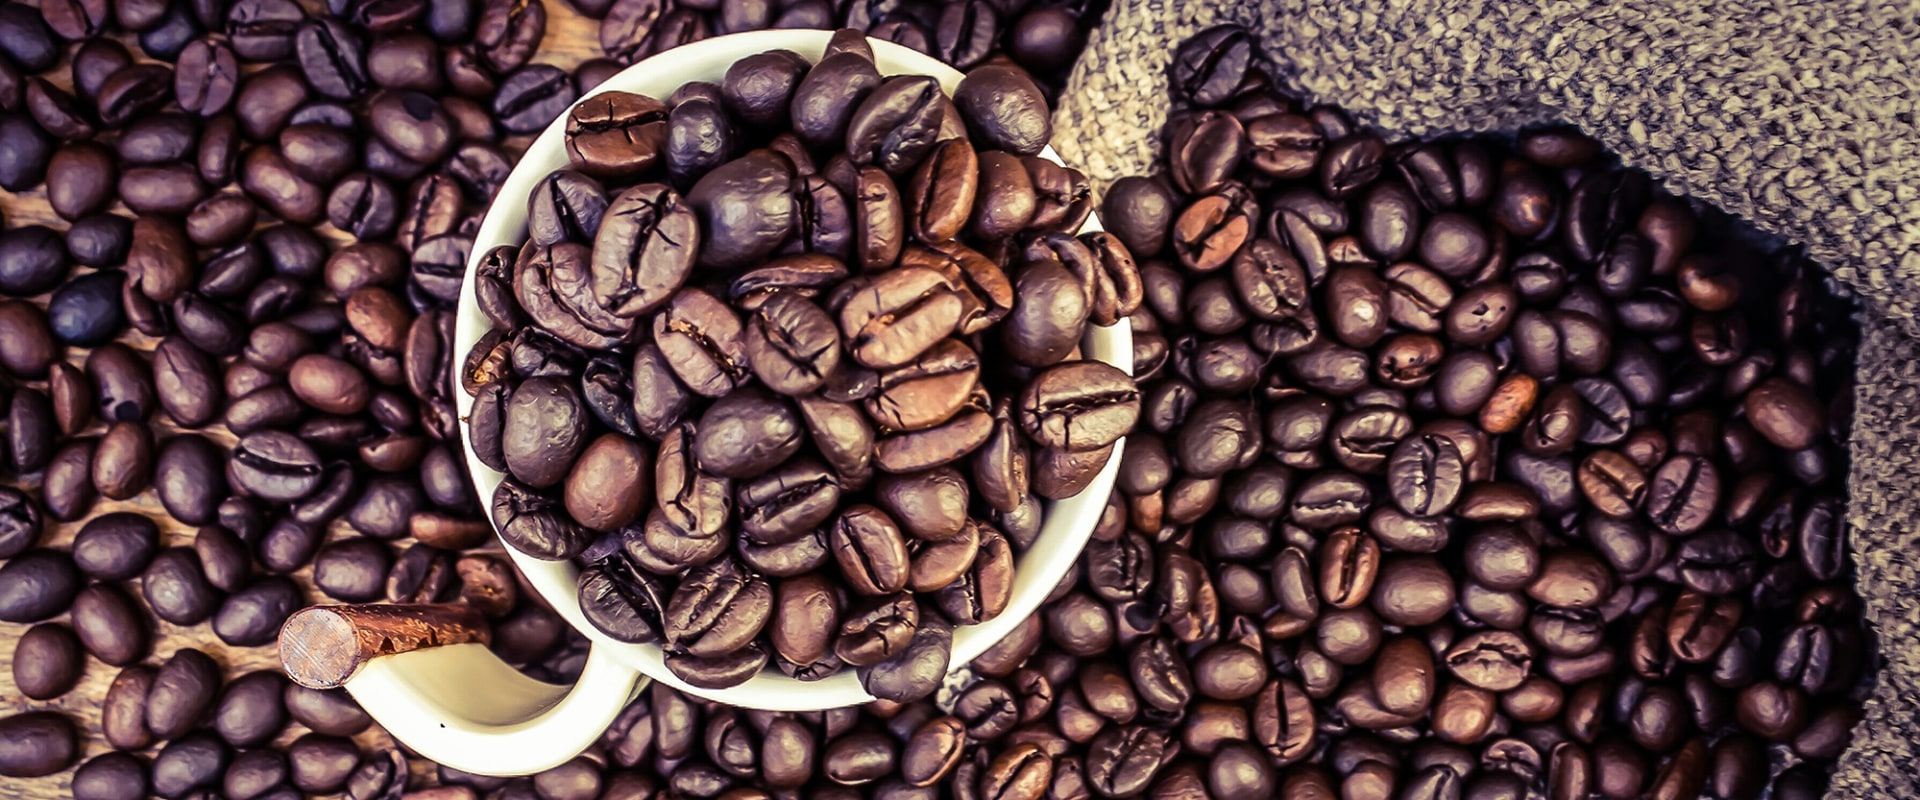 The Science Behind Coffee: How Does it Work?